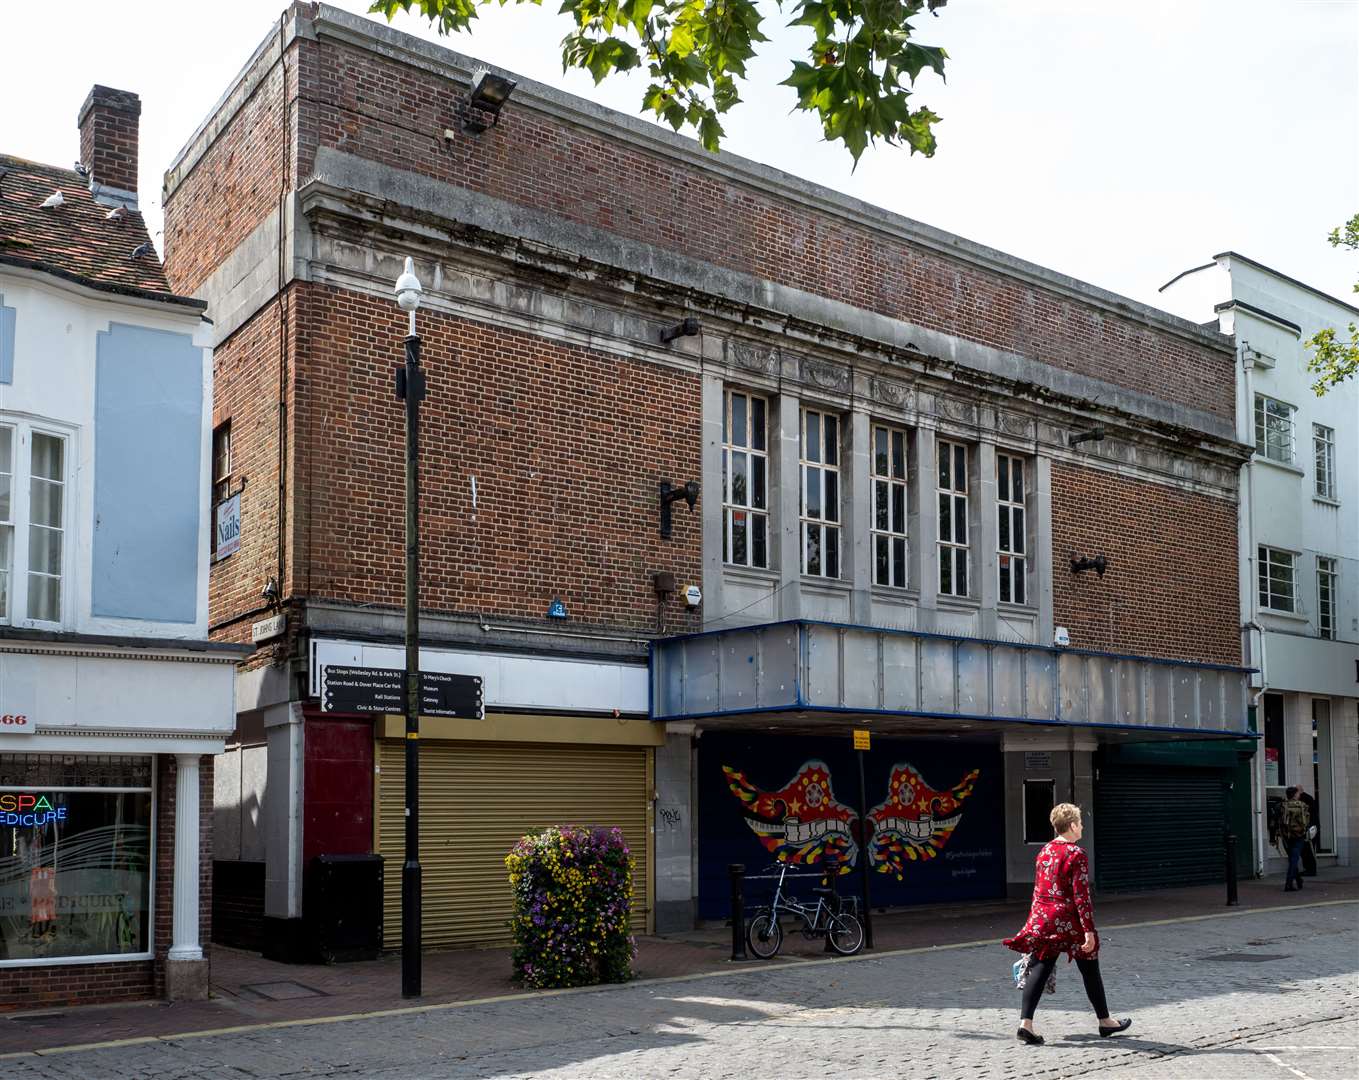 The former Odeon cinema failed to be listed, progressing plans to partially demolish the Art Deco building. Picture: Ian Grundy